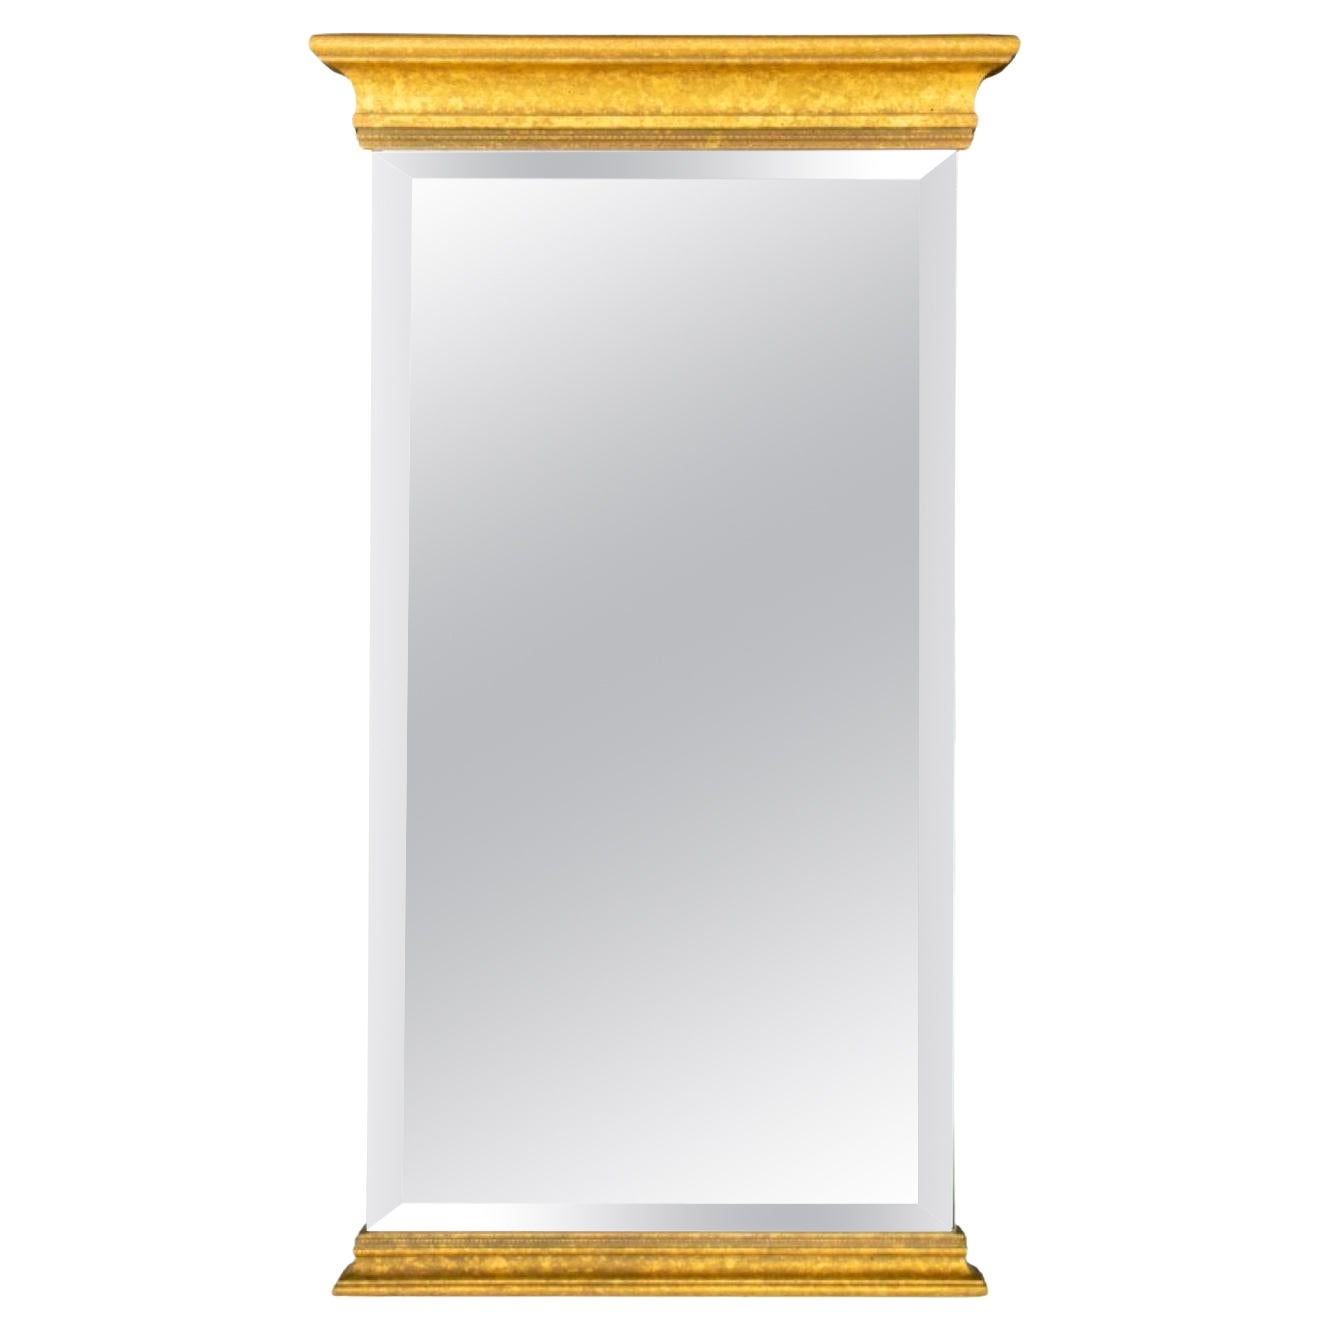 Neoclassical Style Giltwood Beveled Mirror